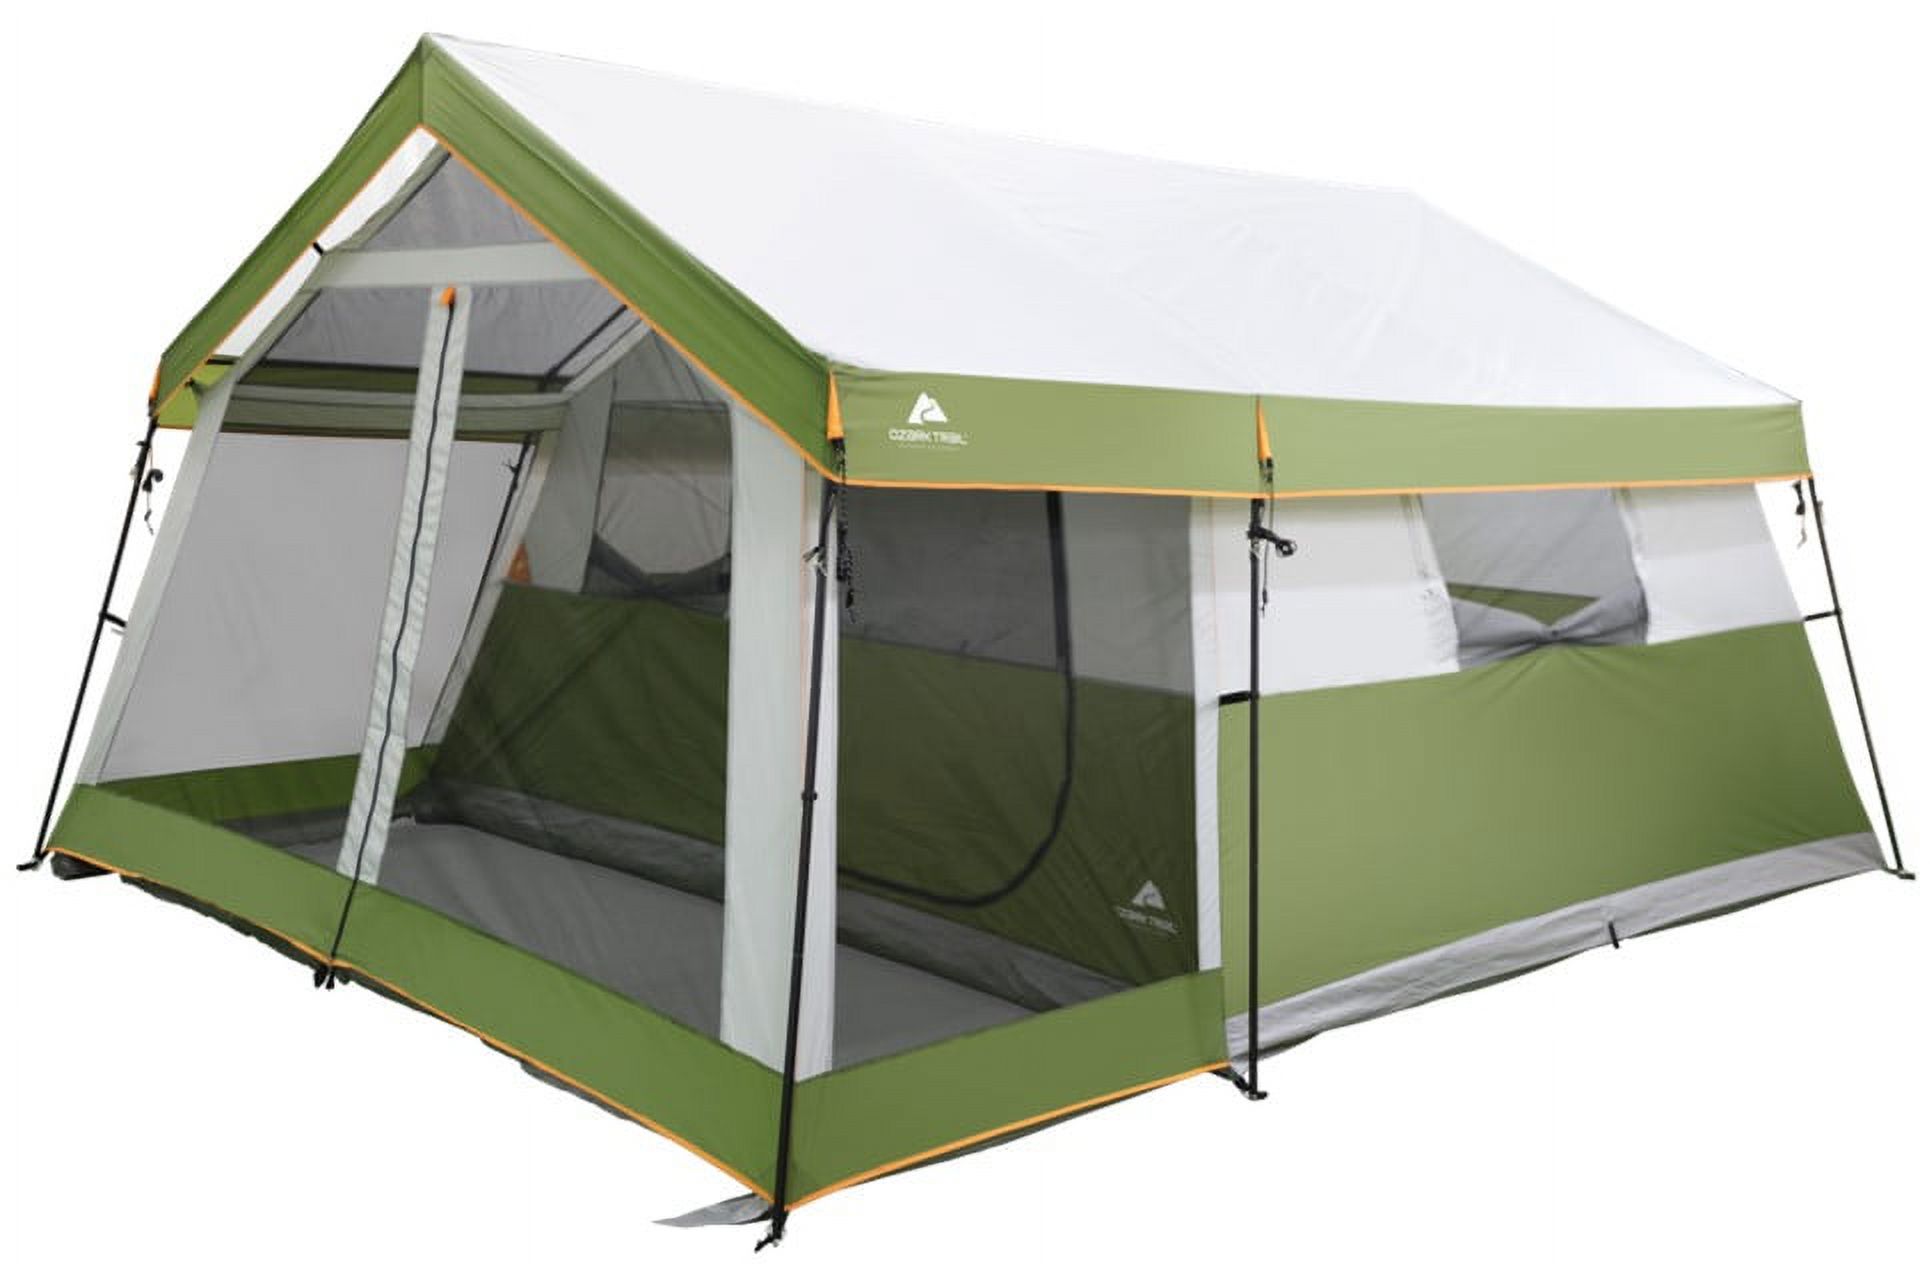 Ozark Trail 8-Person Family Cabin Tent 1 Room with Screen Porch, Green, Dimensions: 12'x11'x7', 45.86 lbs. - image 1 of 12